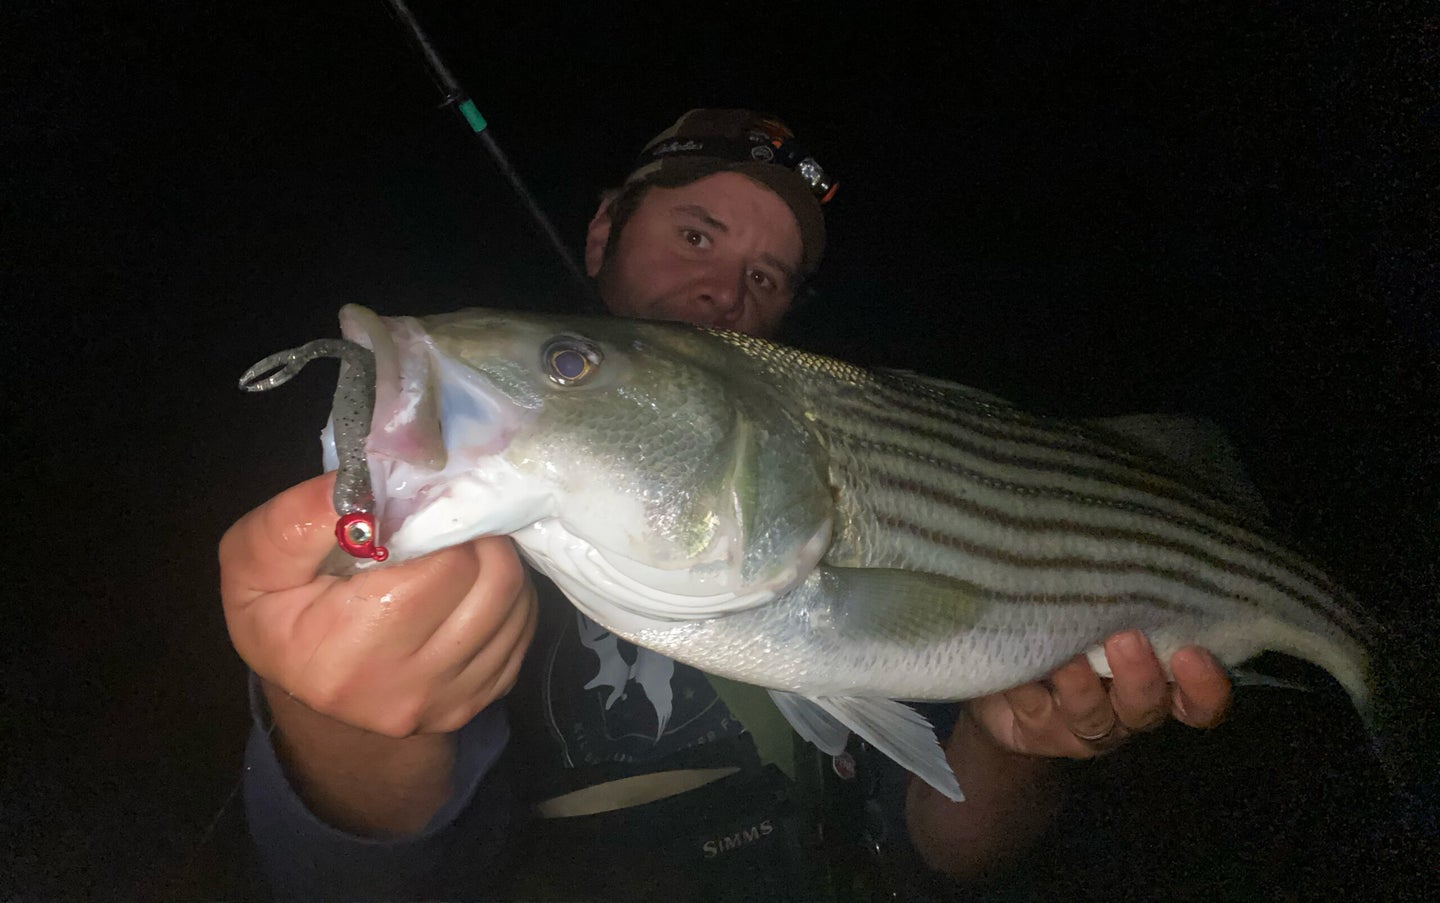 These baits are recommended for striper fishing